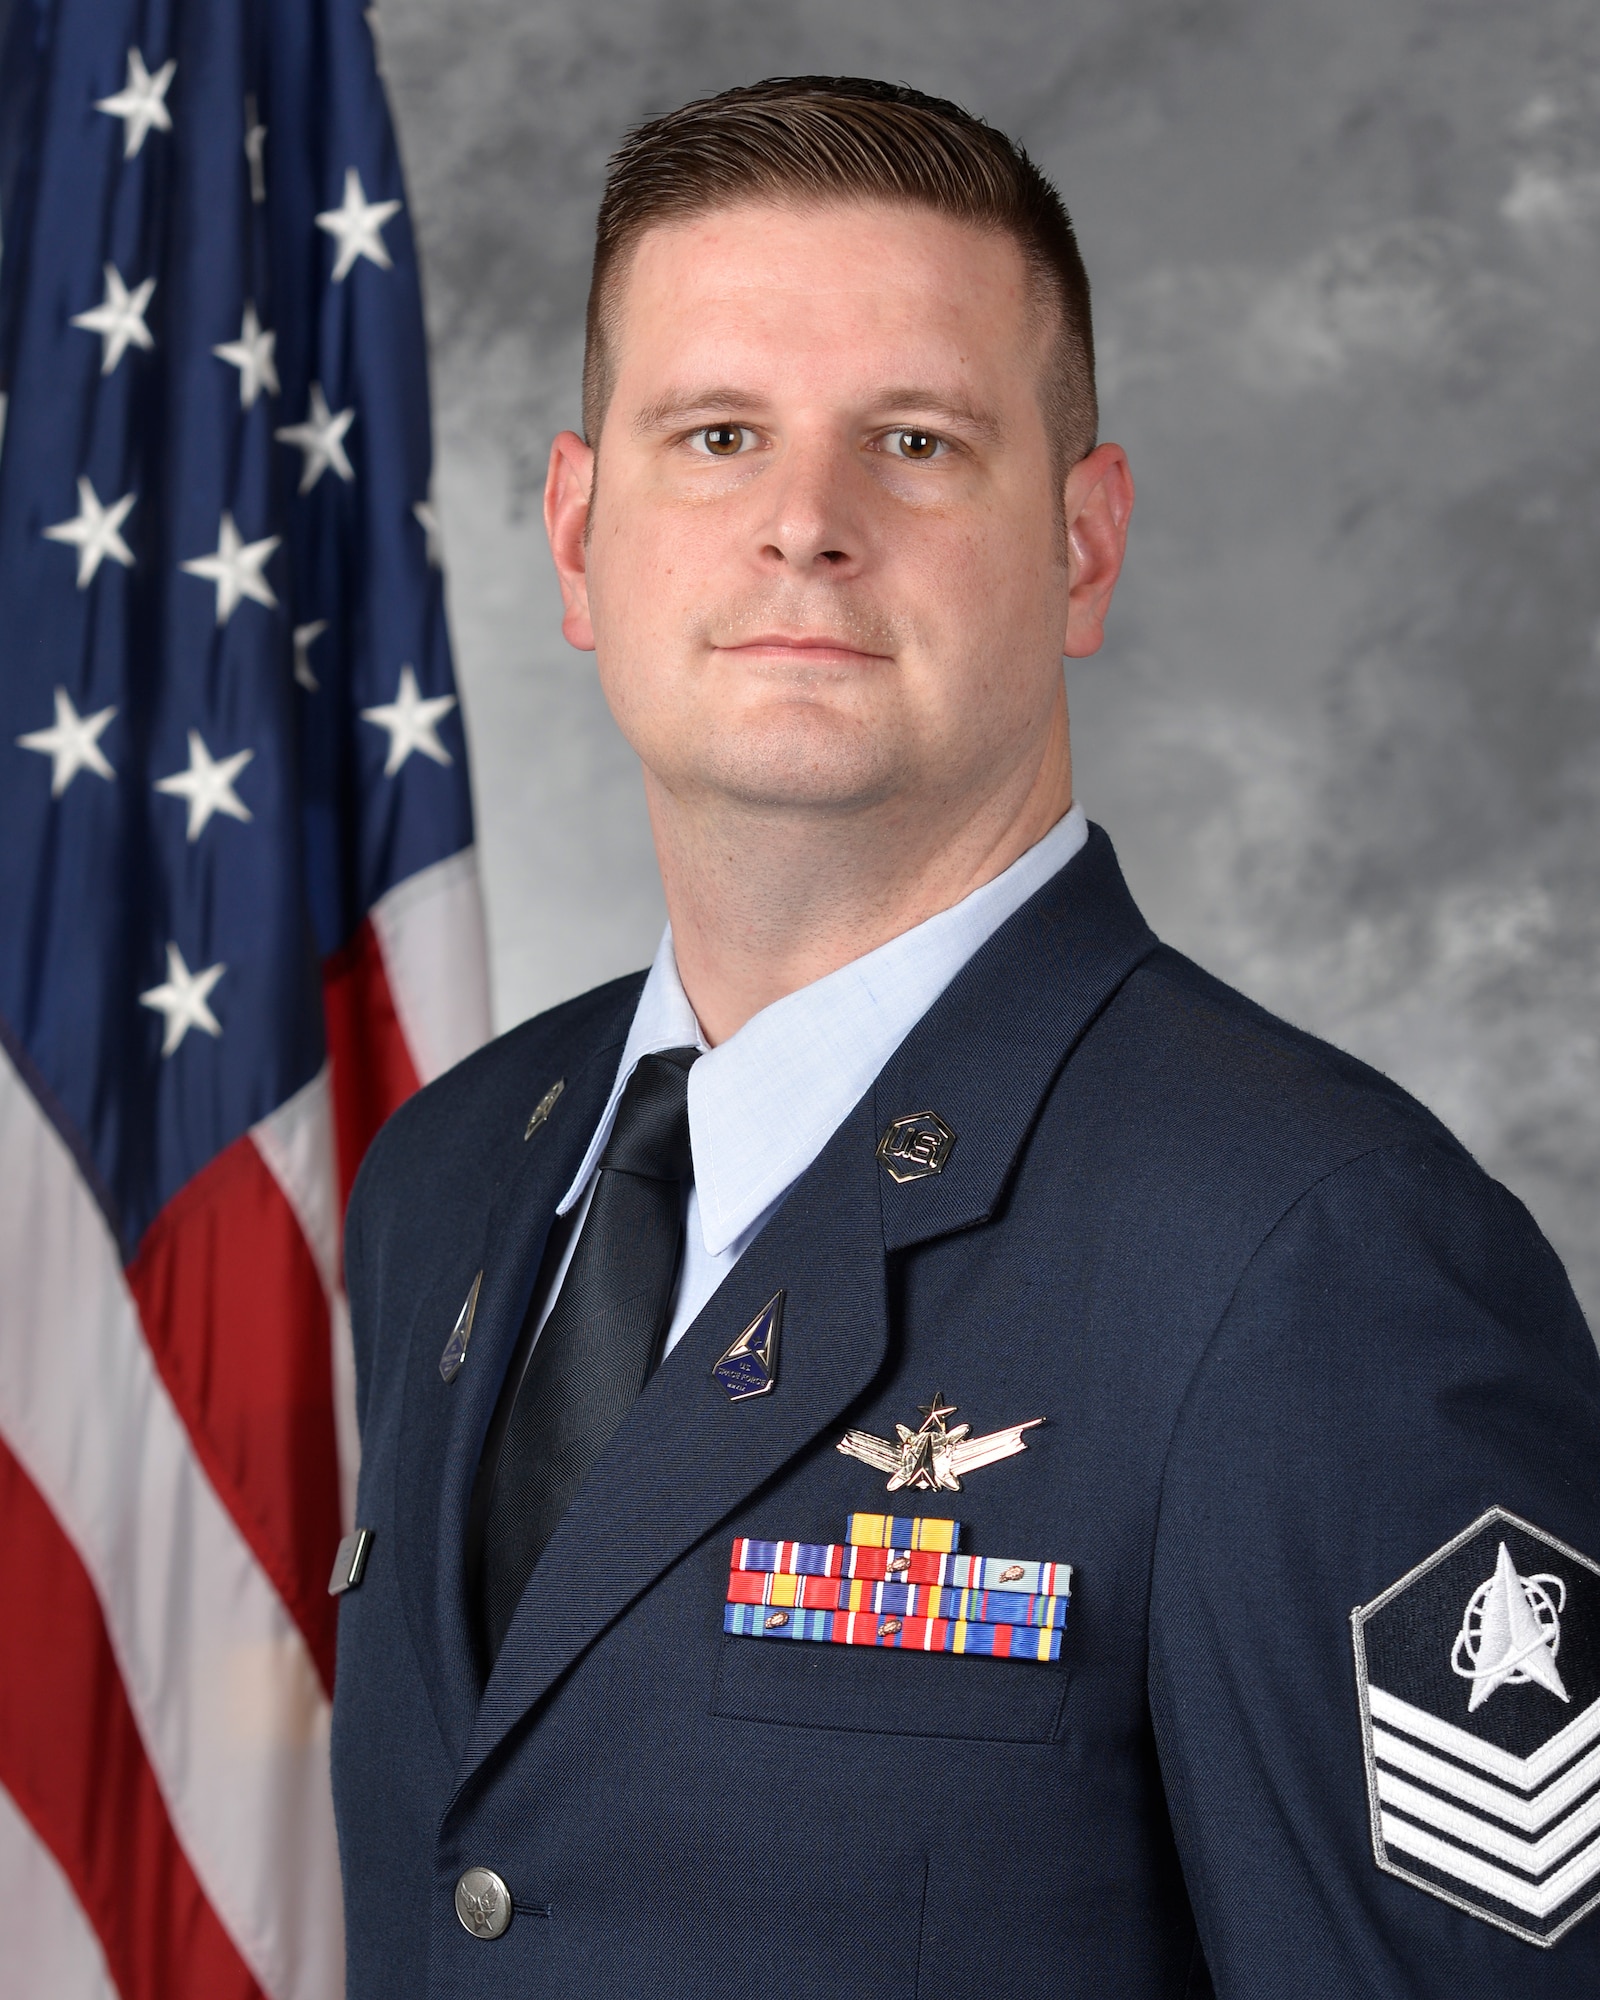 Technical Sergeant Jake Harris, NCOIC of Current Space Operations, USAFE-AFAFRICA, won the individual category of “Commitment” during the first-ever Polaris Awards.